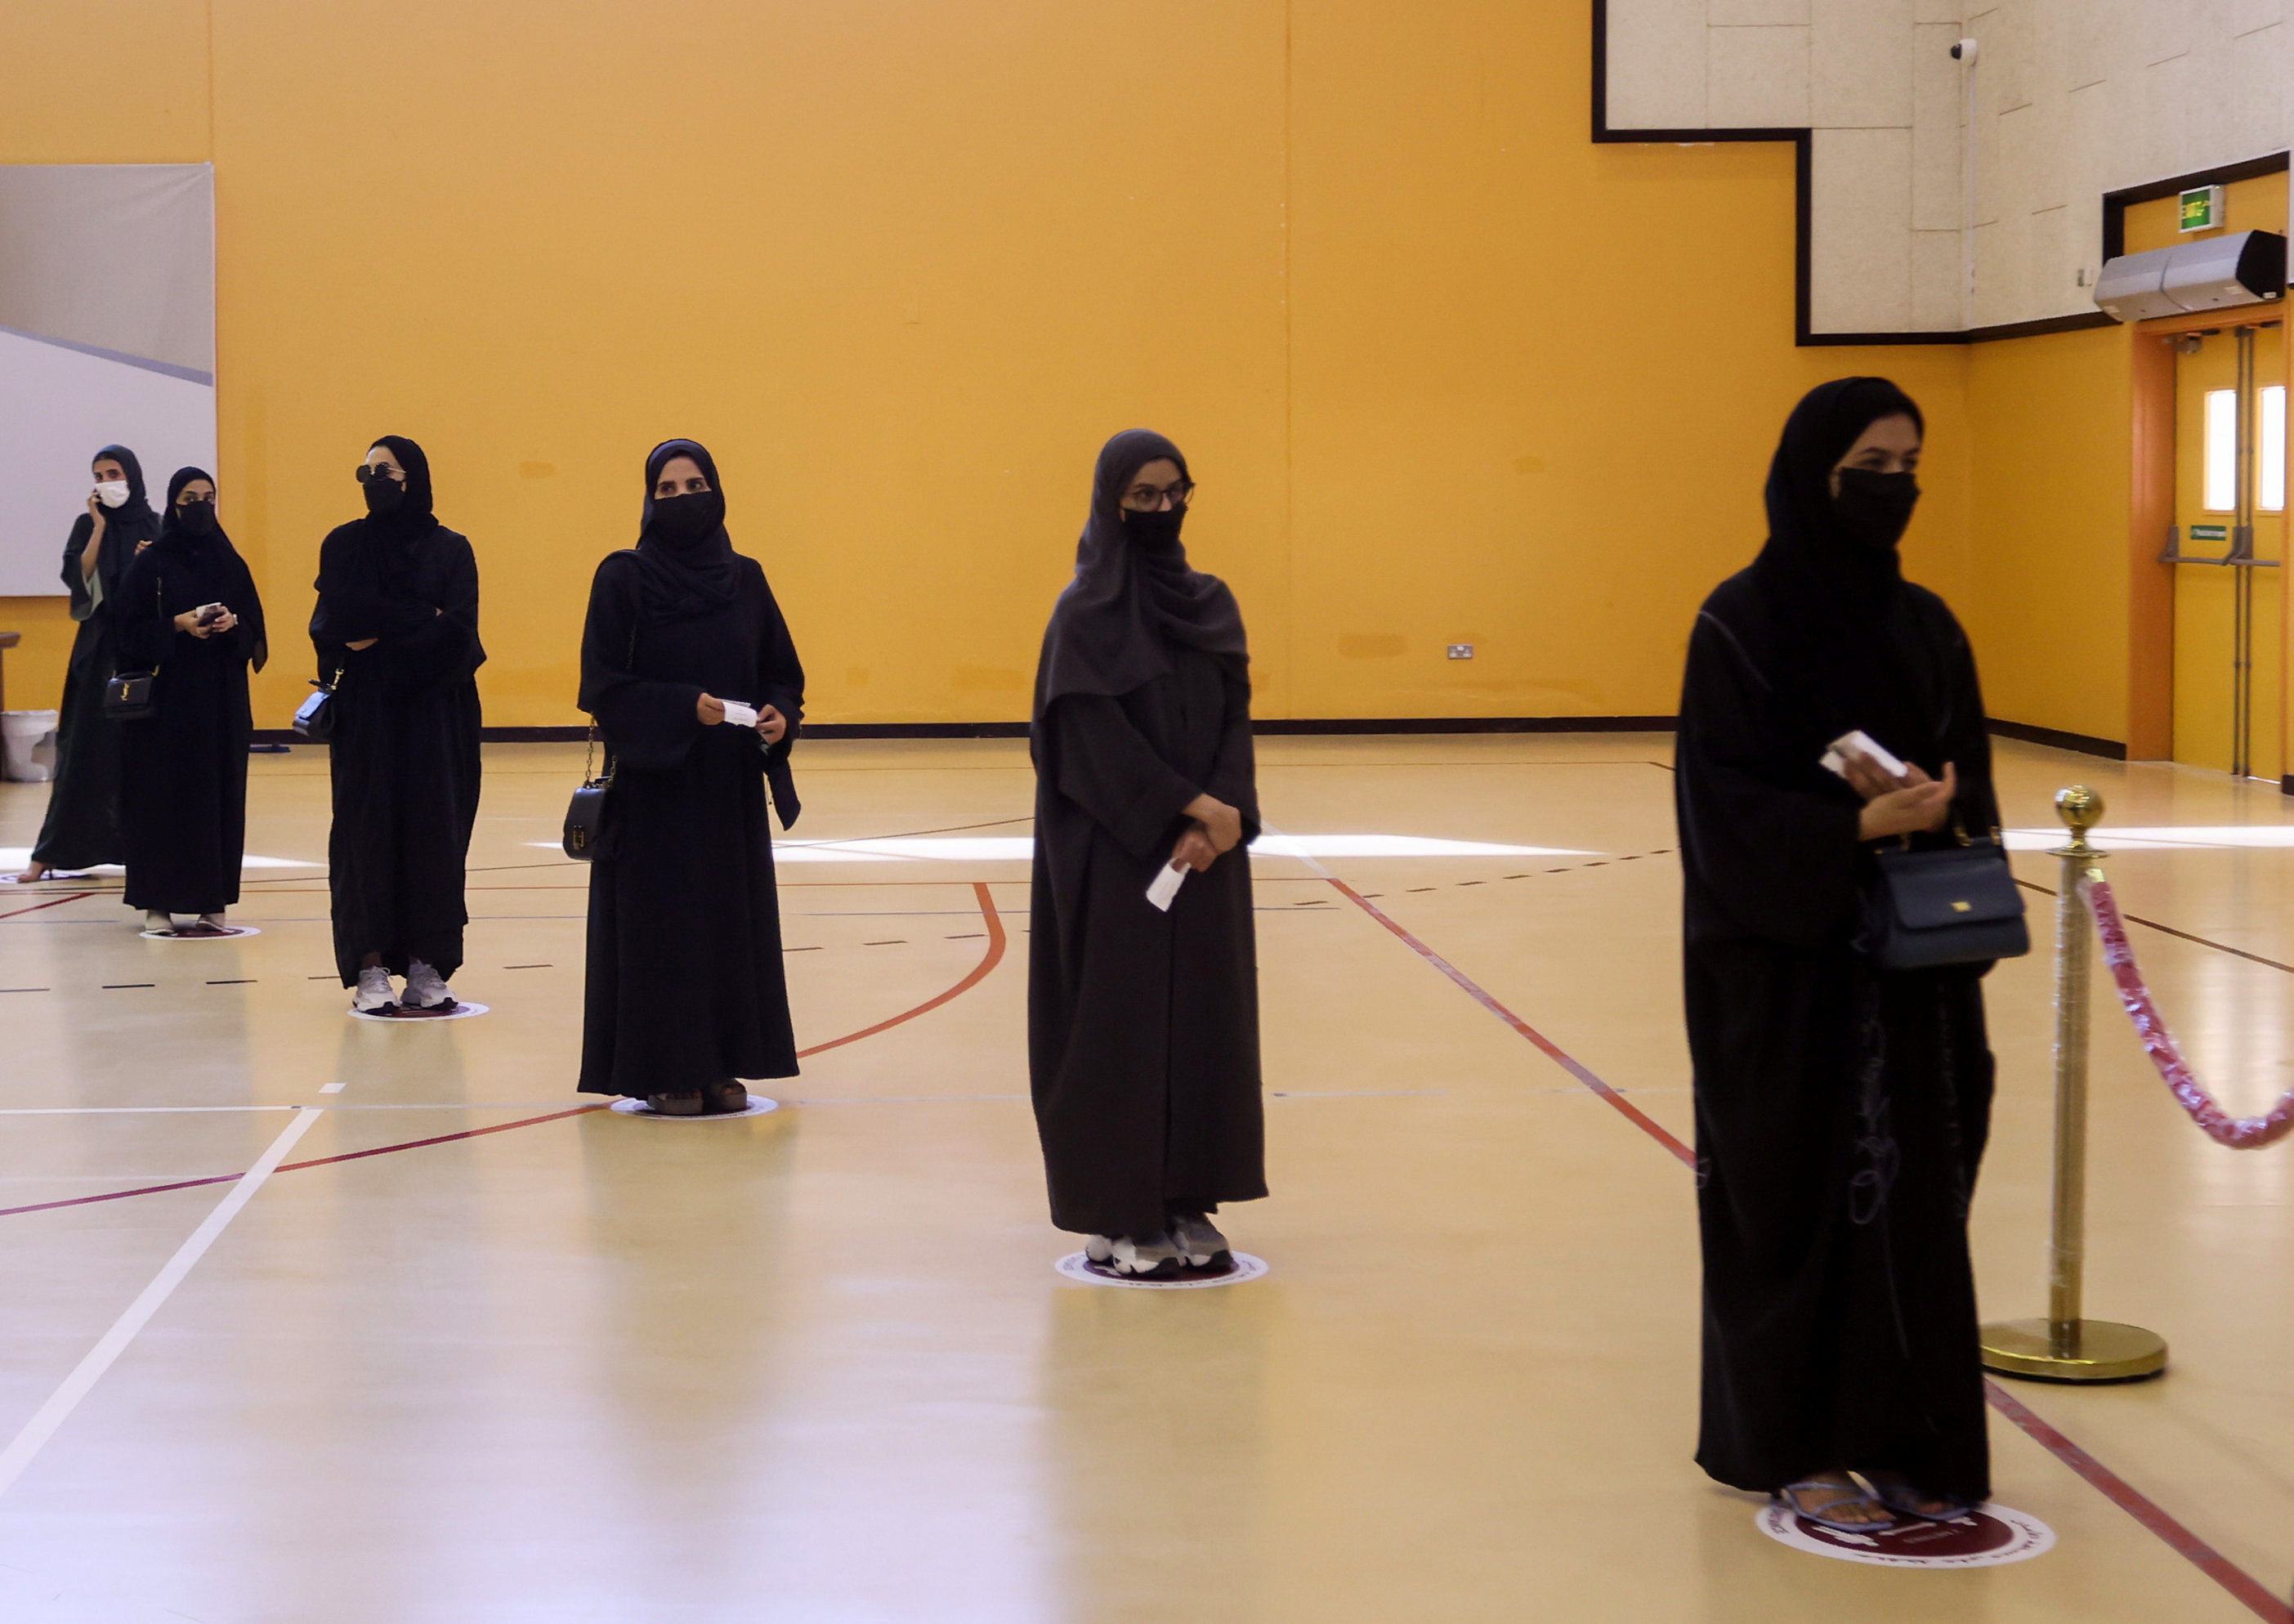 Voters line up at a polling station in the Gulf Arab state's first legislative elections for two-thirds of the advisory Shura Council, in Doha, Qatar October 2, 2021. REUTERS/Ibraheem Al Omari   